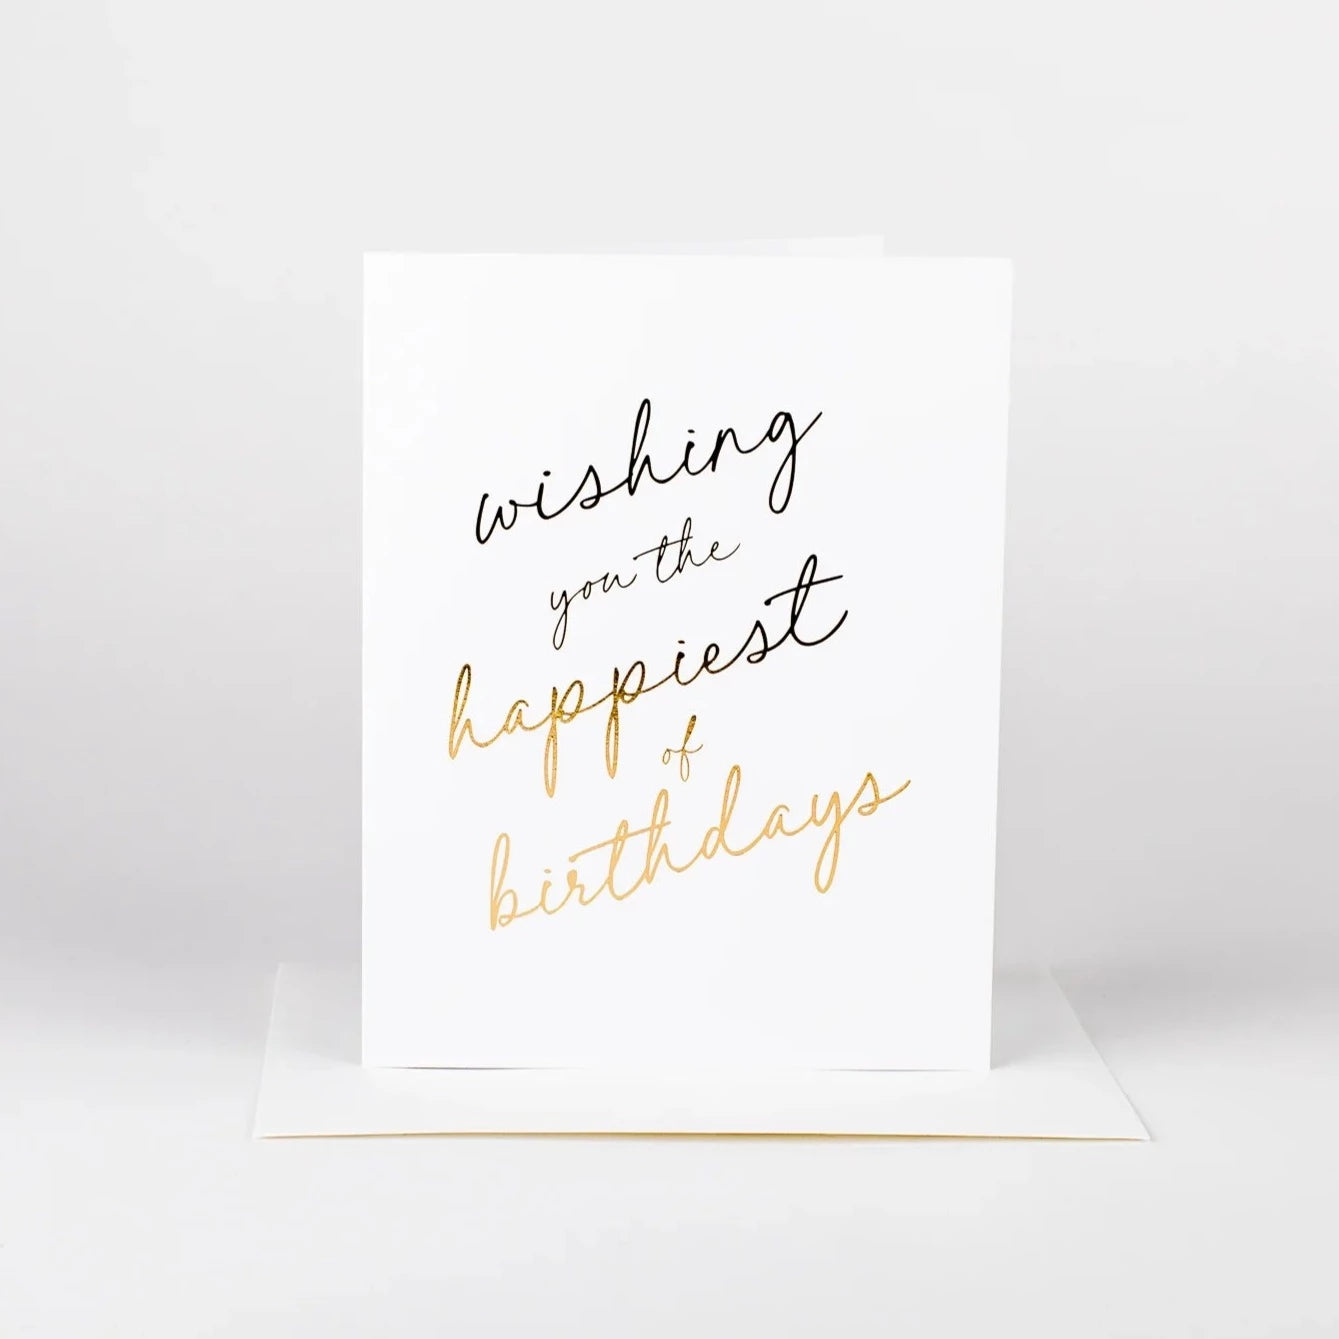 Wishing You the Happiest of Birthdays - Card